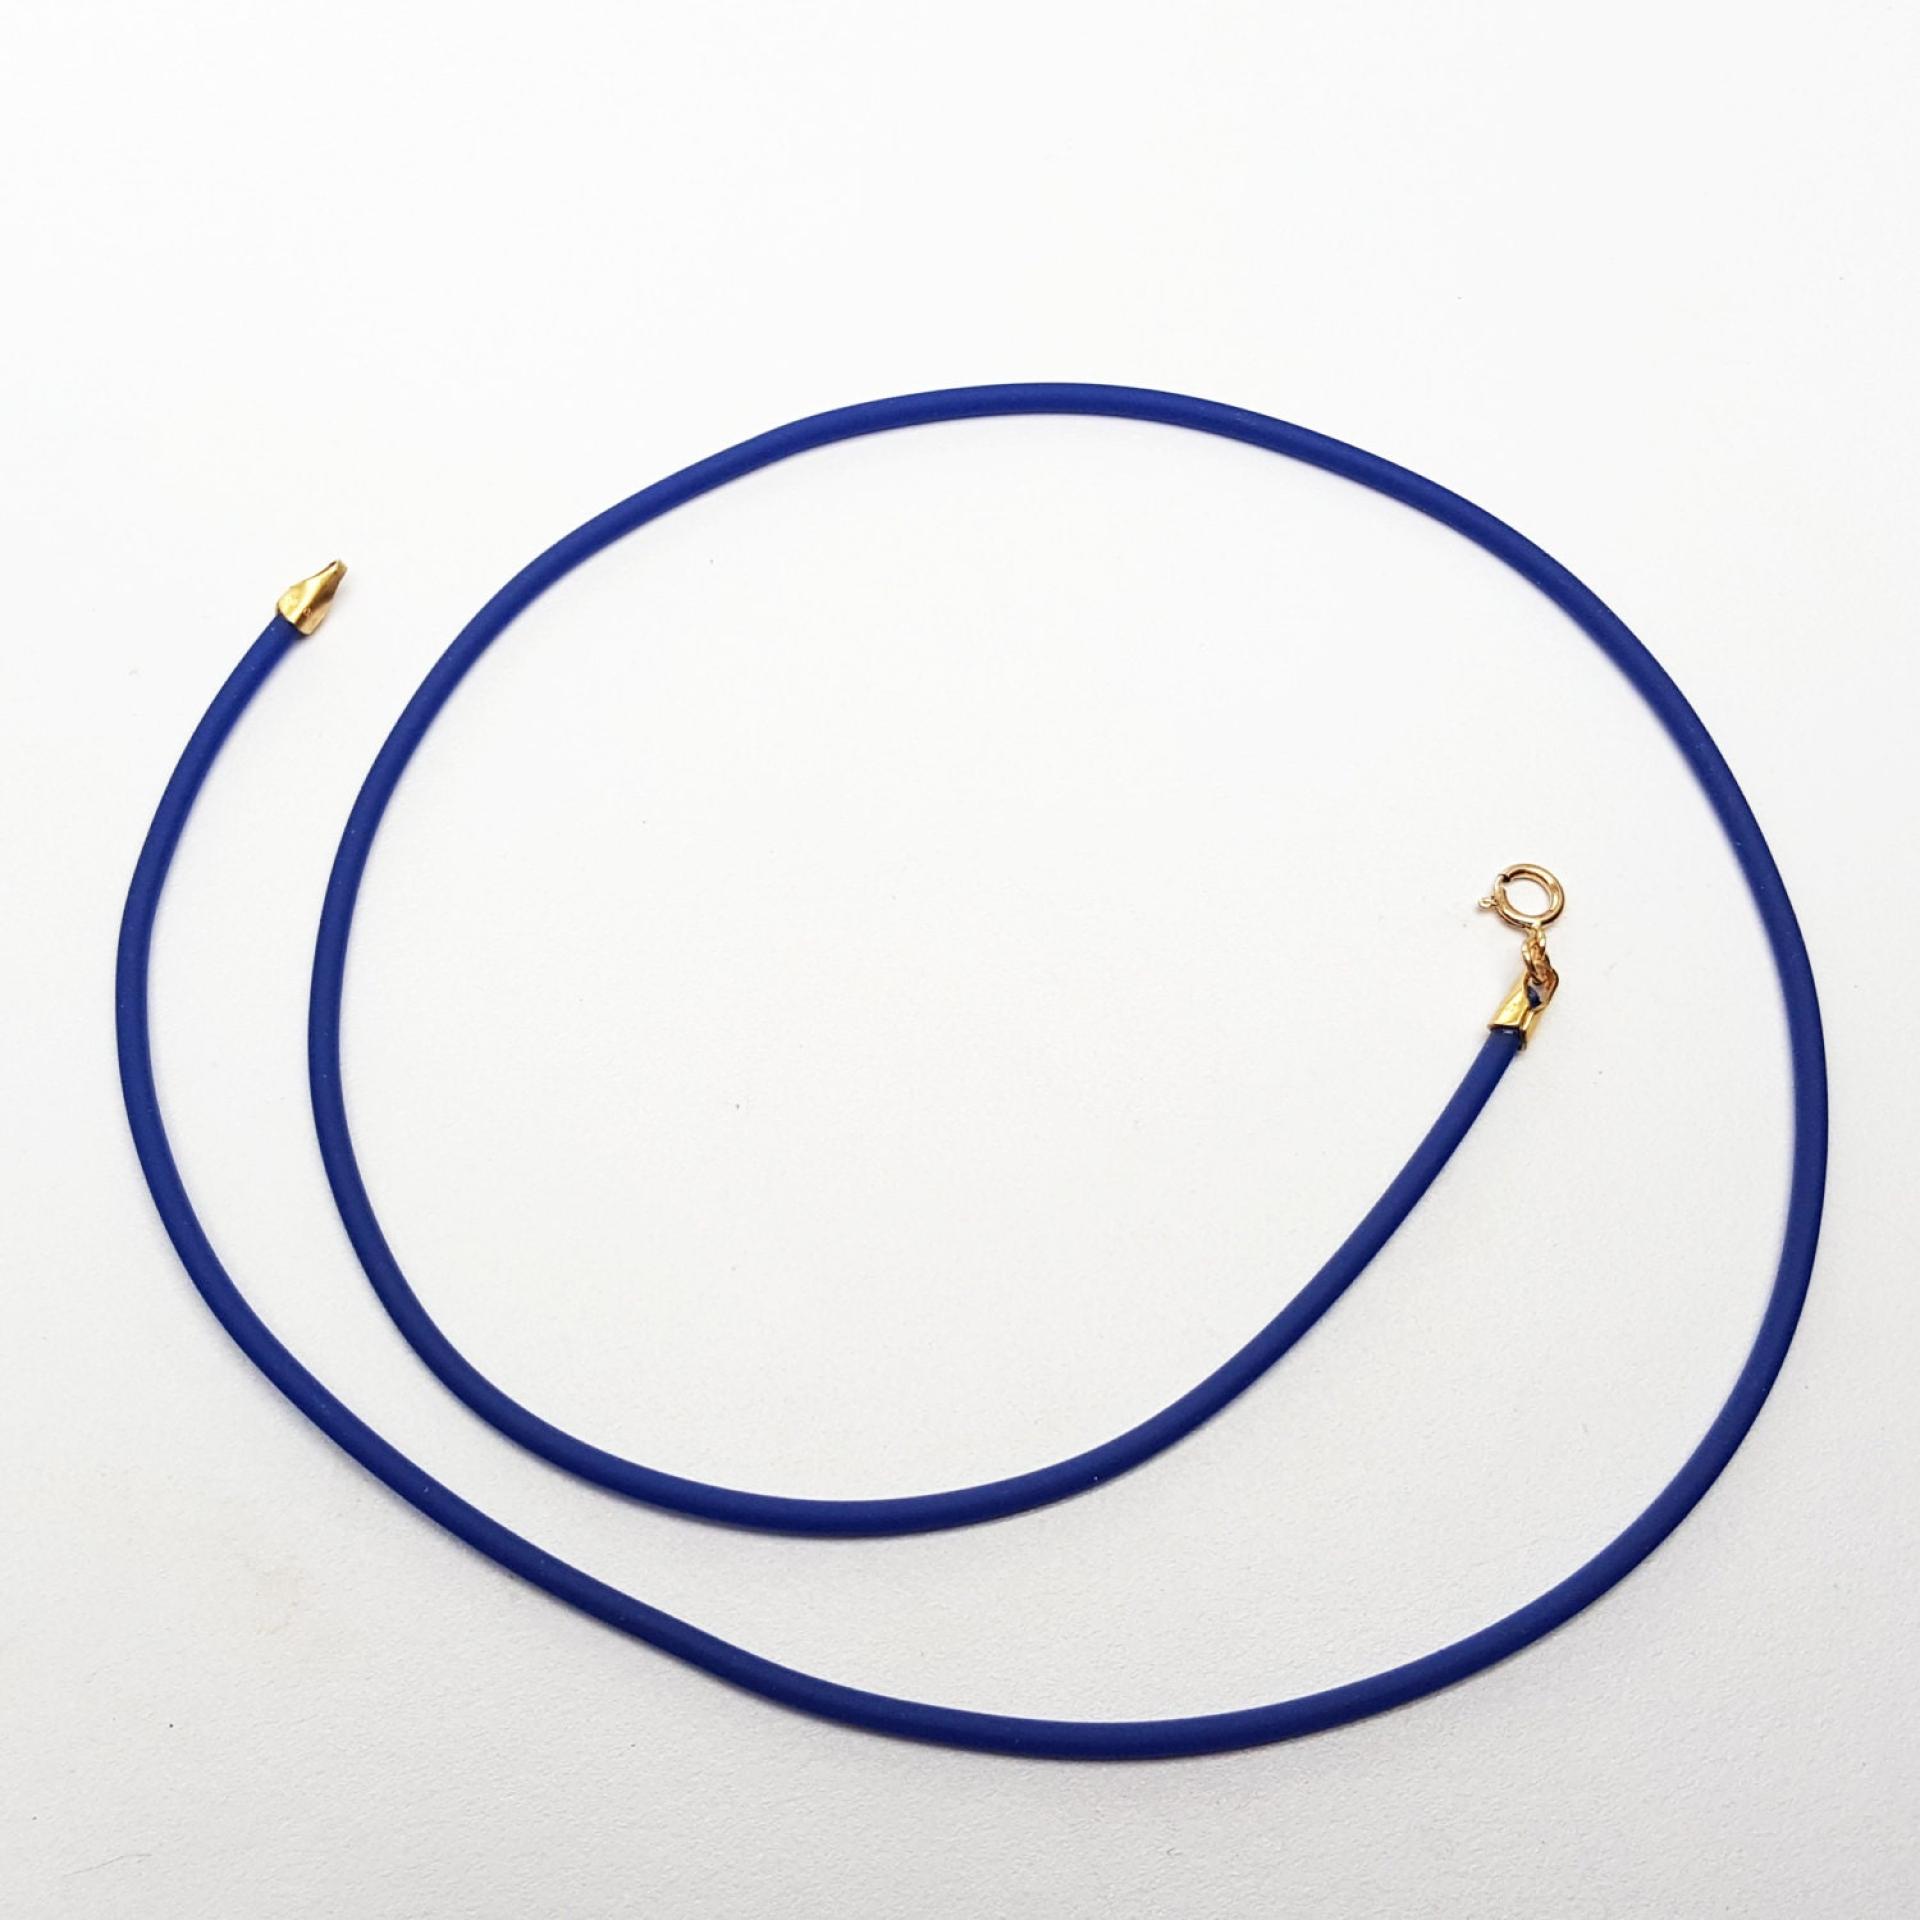 BlueRubber Cord Necklace, 2 mm, Gold Filled Clasp, Interchangeable, 16", 18", 20", 22", 24"